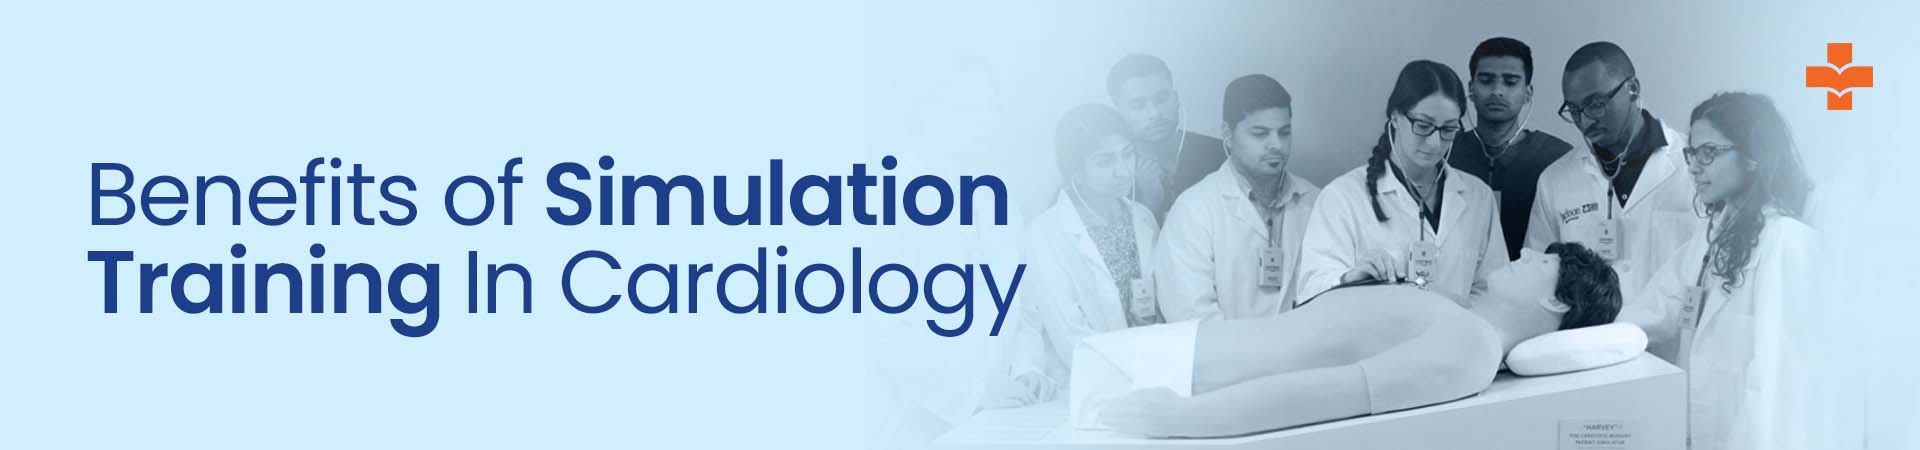 the focus is on outlining the benefits of simulated training specifically tailored for cardiology. This may involve discussing how simulated scenarios enhance practical skills, decision-making, and overall proficiency in the field of cardiology.